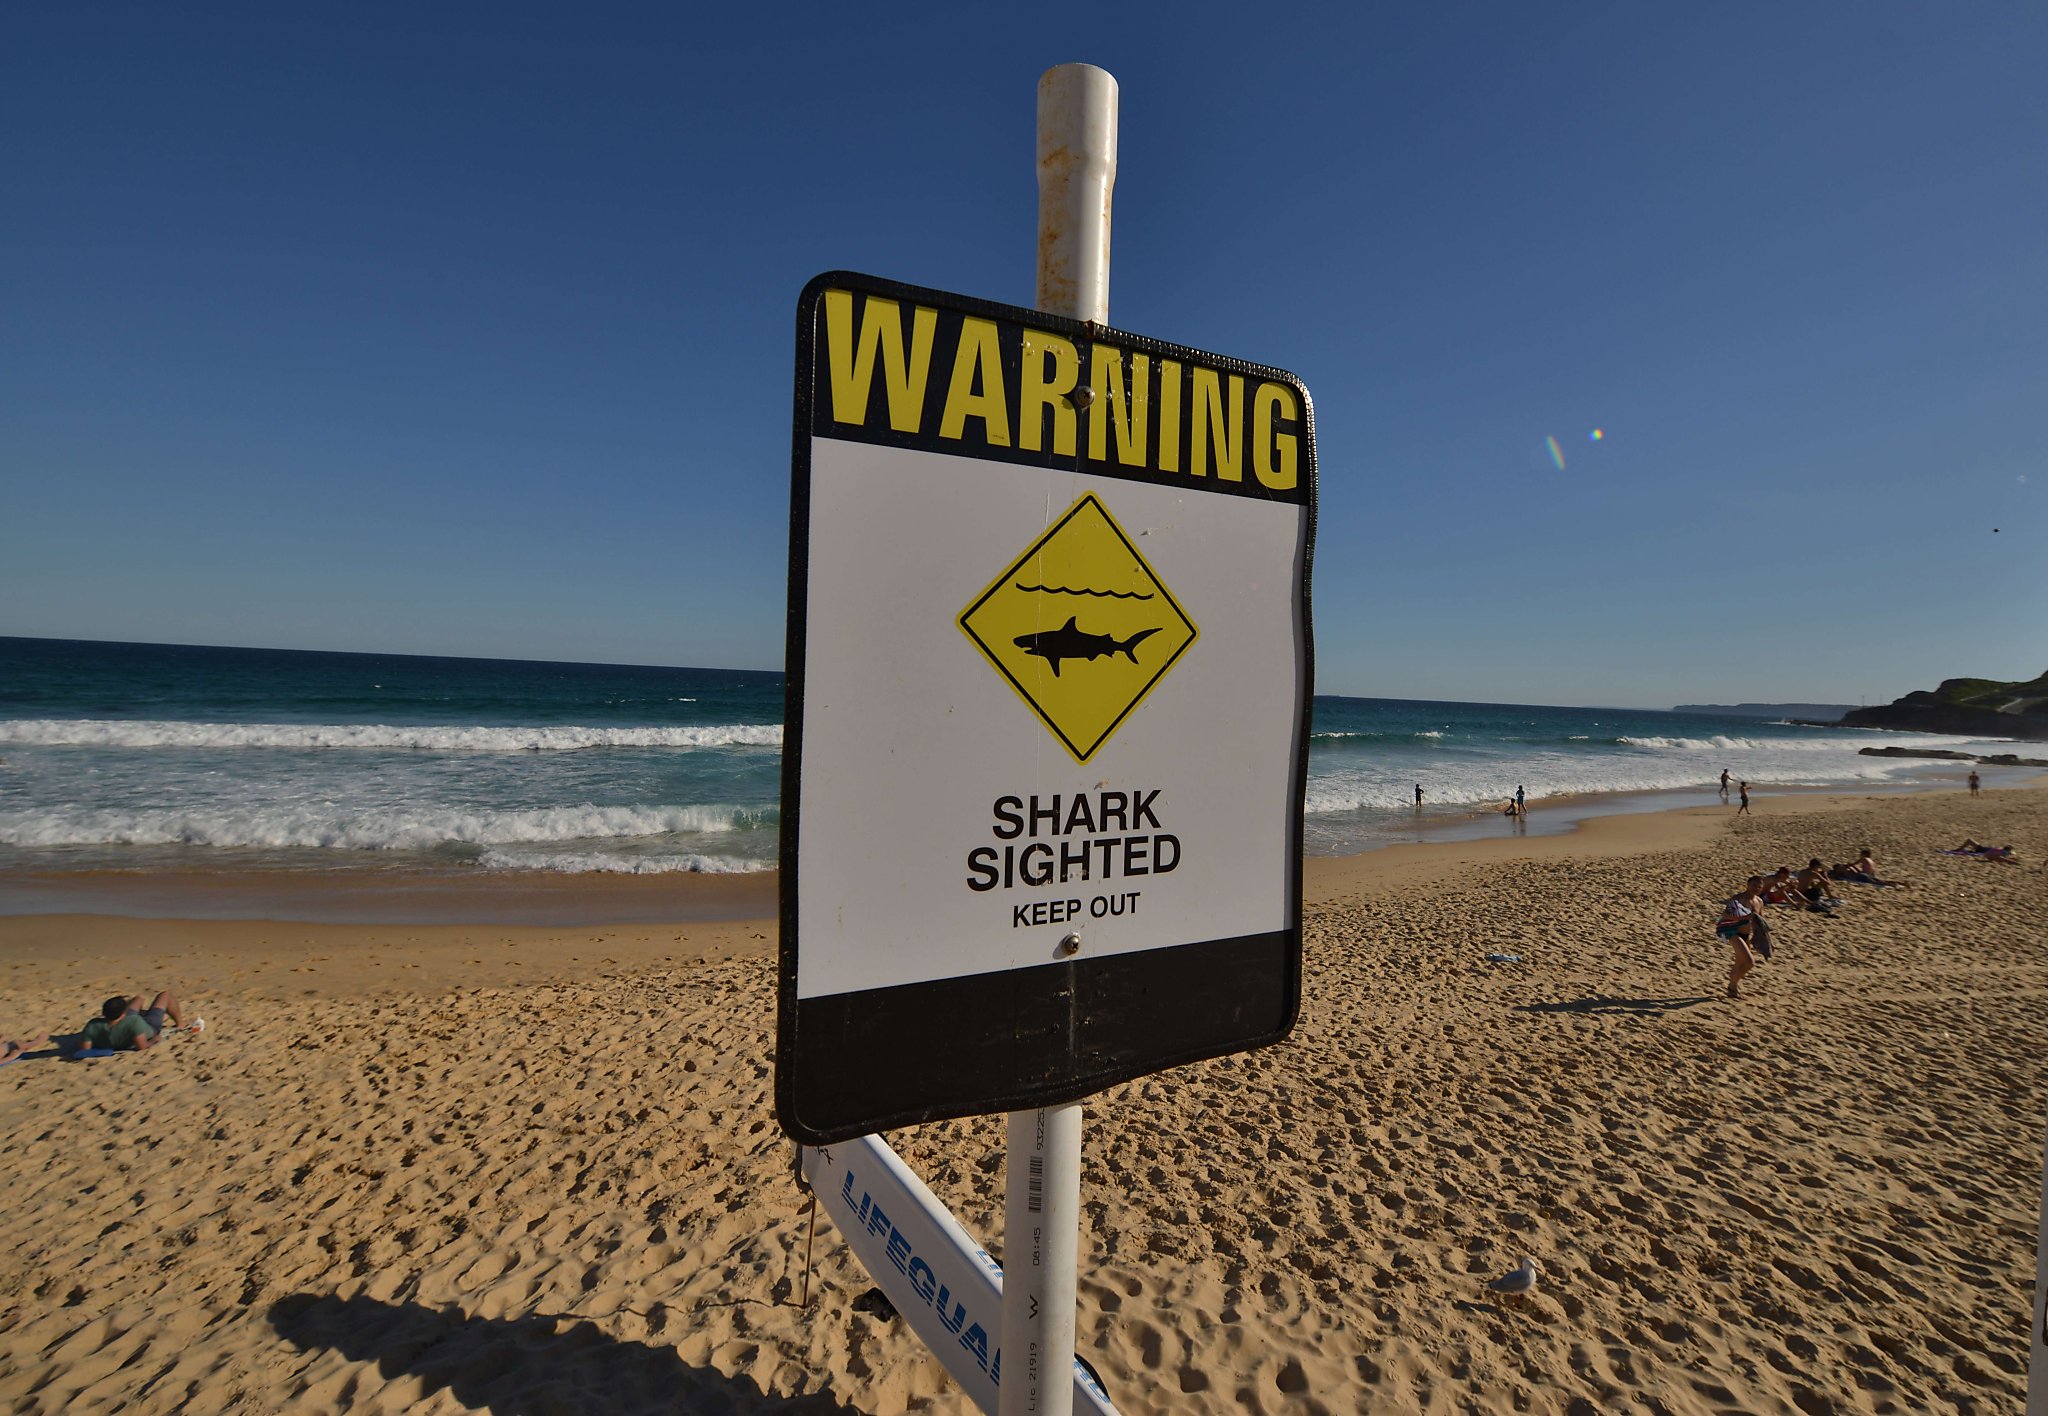 New report shows shark attacks have increased in North America